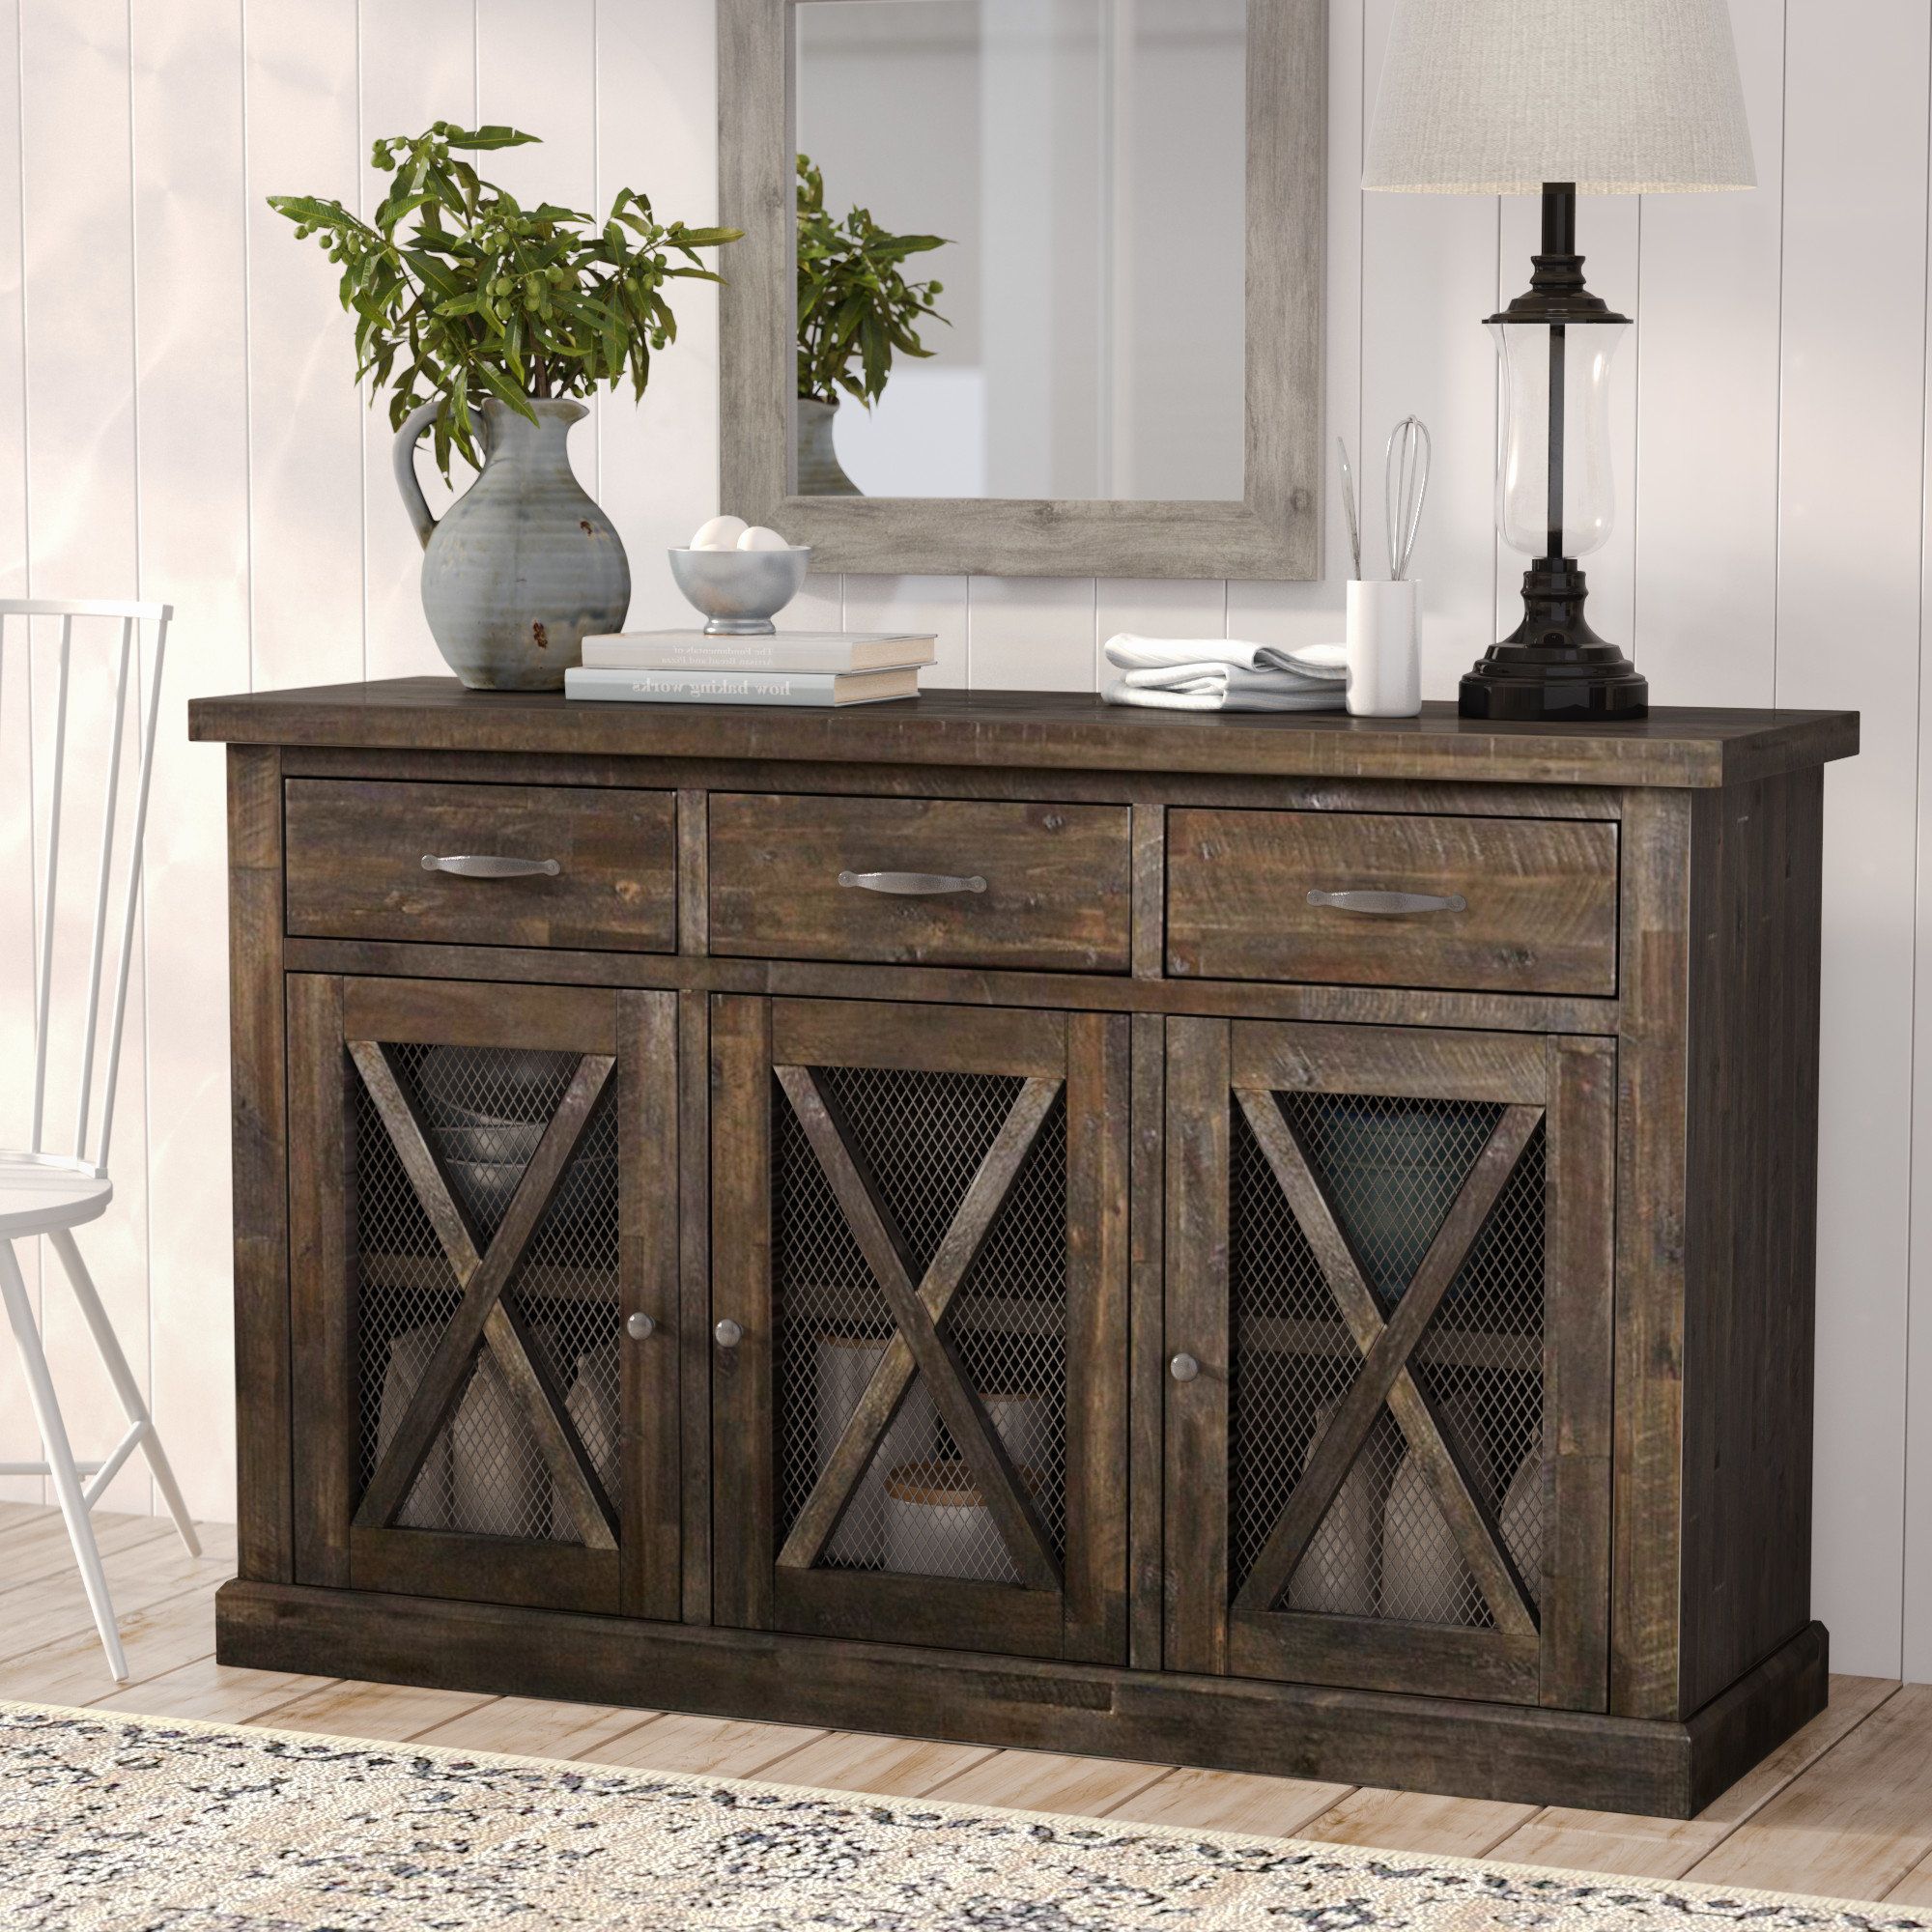 Weathered Grey Buffet | Wayfair With Regard To Contemporary Distressed Grey Buffets (View 15 of 20)